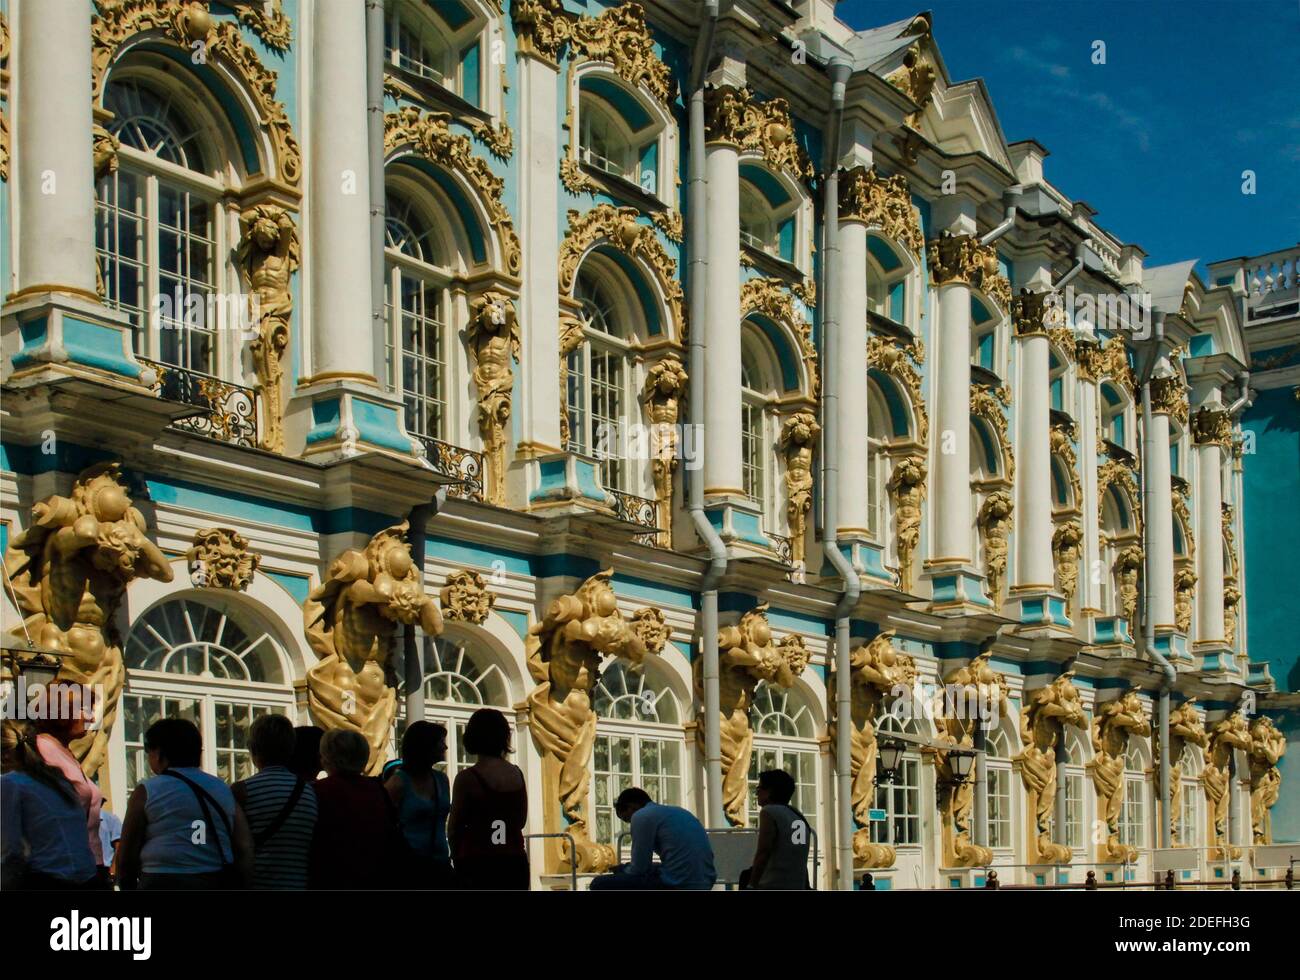 People silhouetted against the facade of the Catherine Palace in St Petersburg, Russia Stock Photo